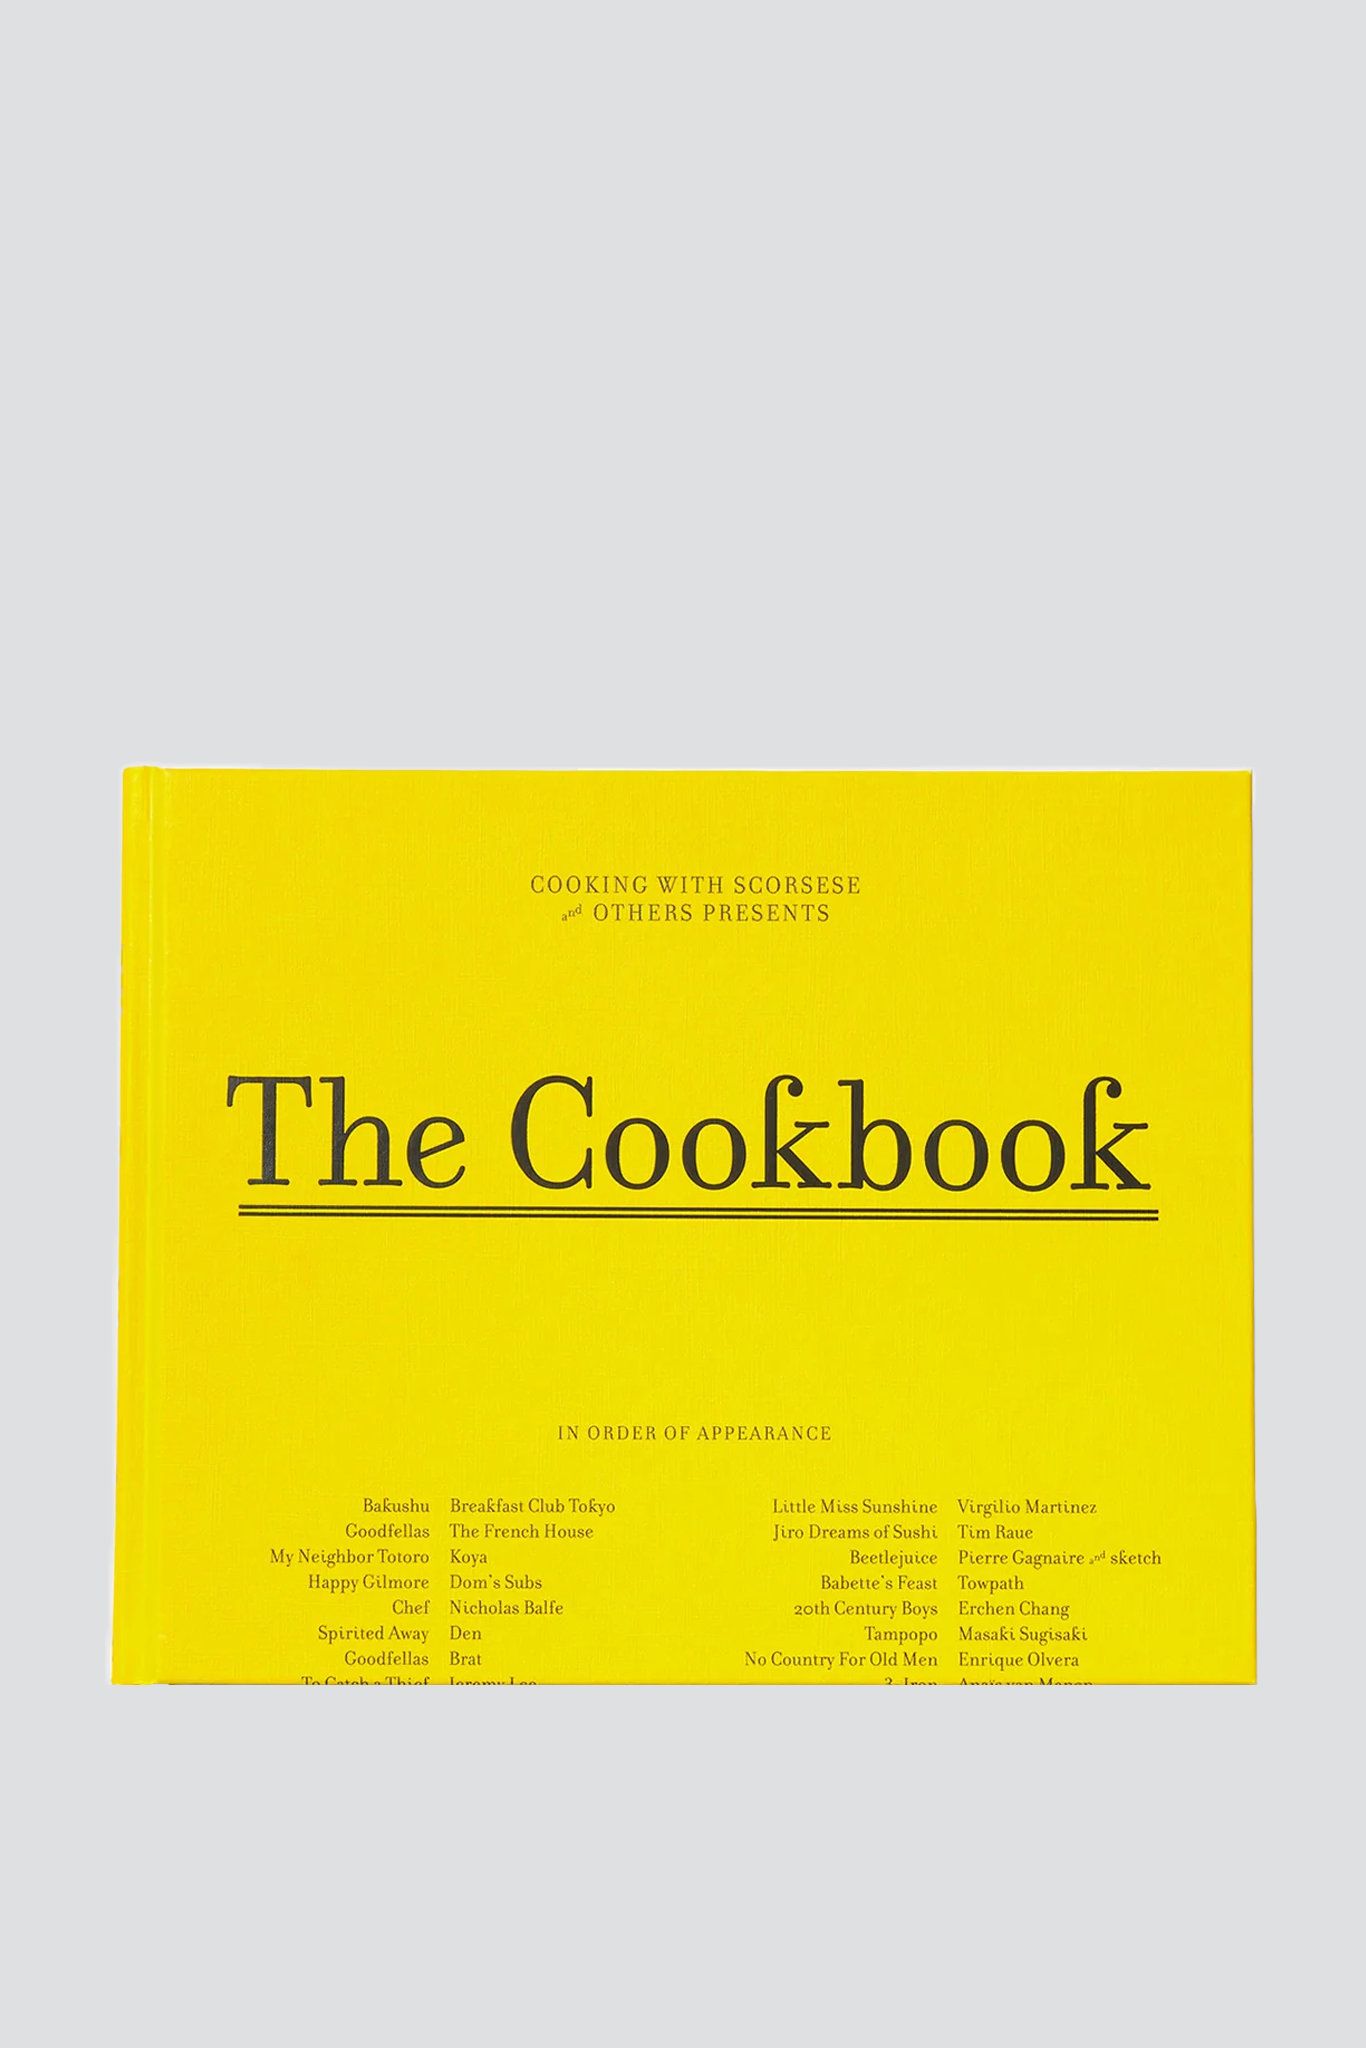 Cooking With Scorsese: The Cookbook